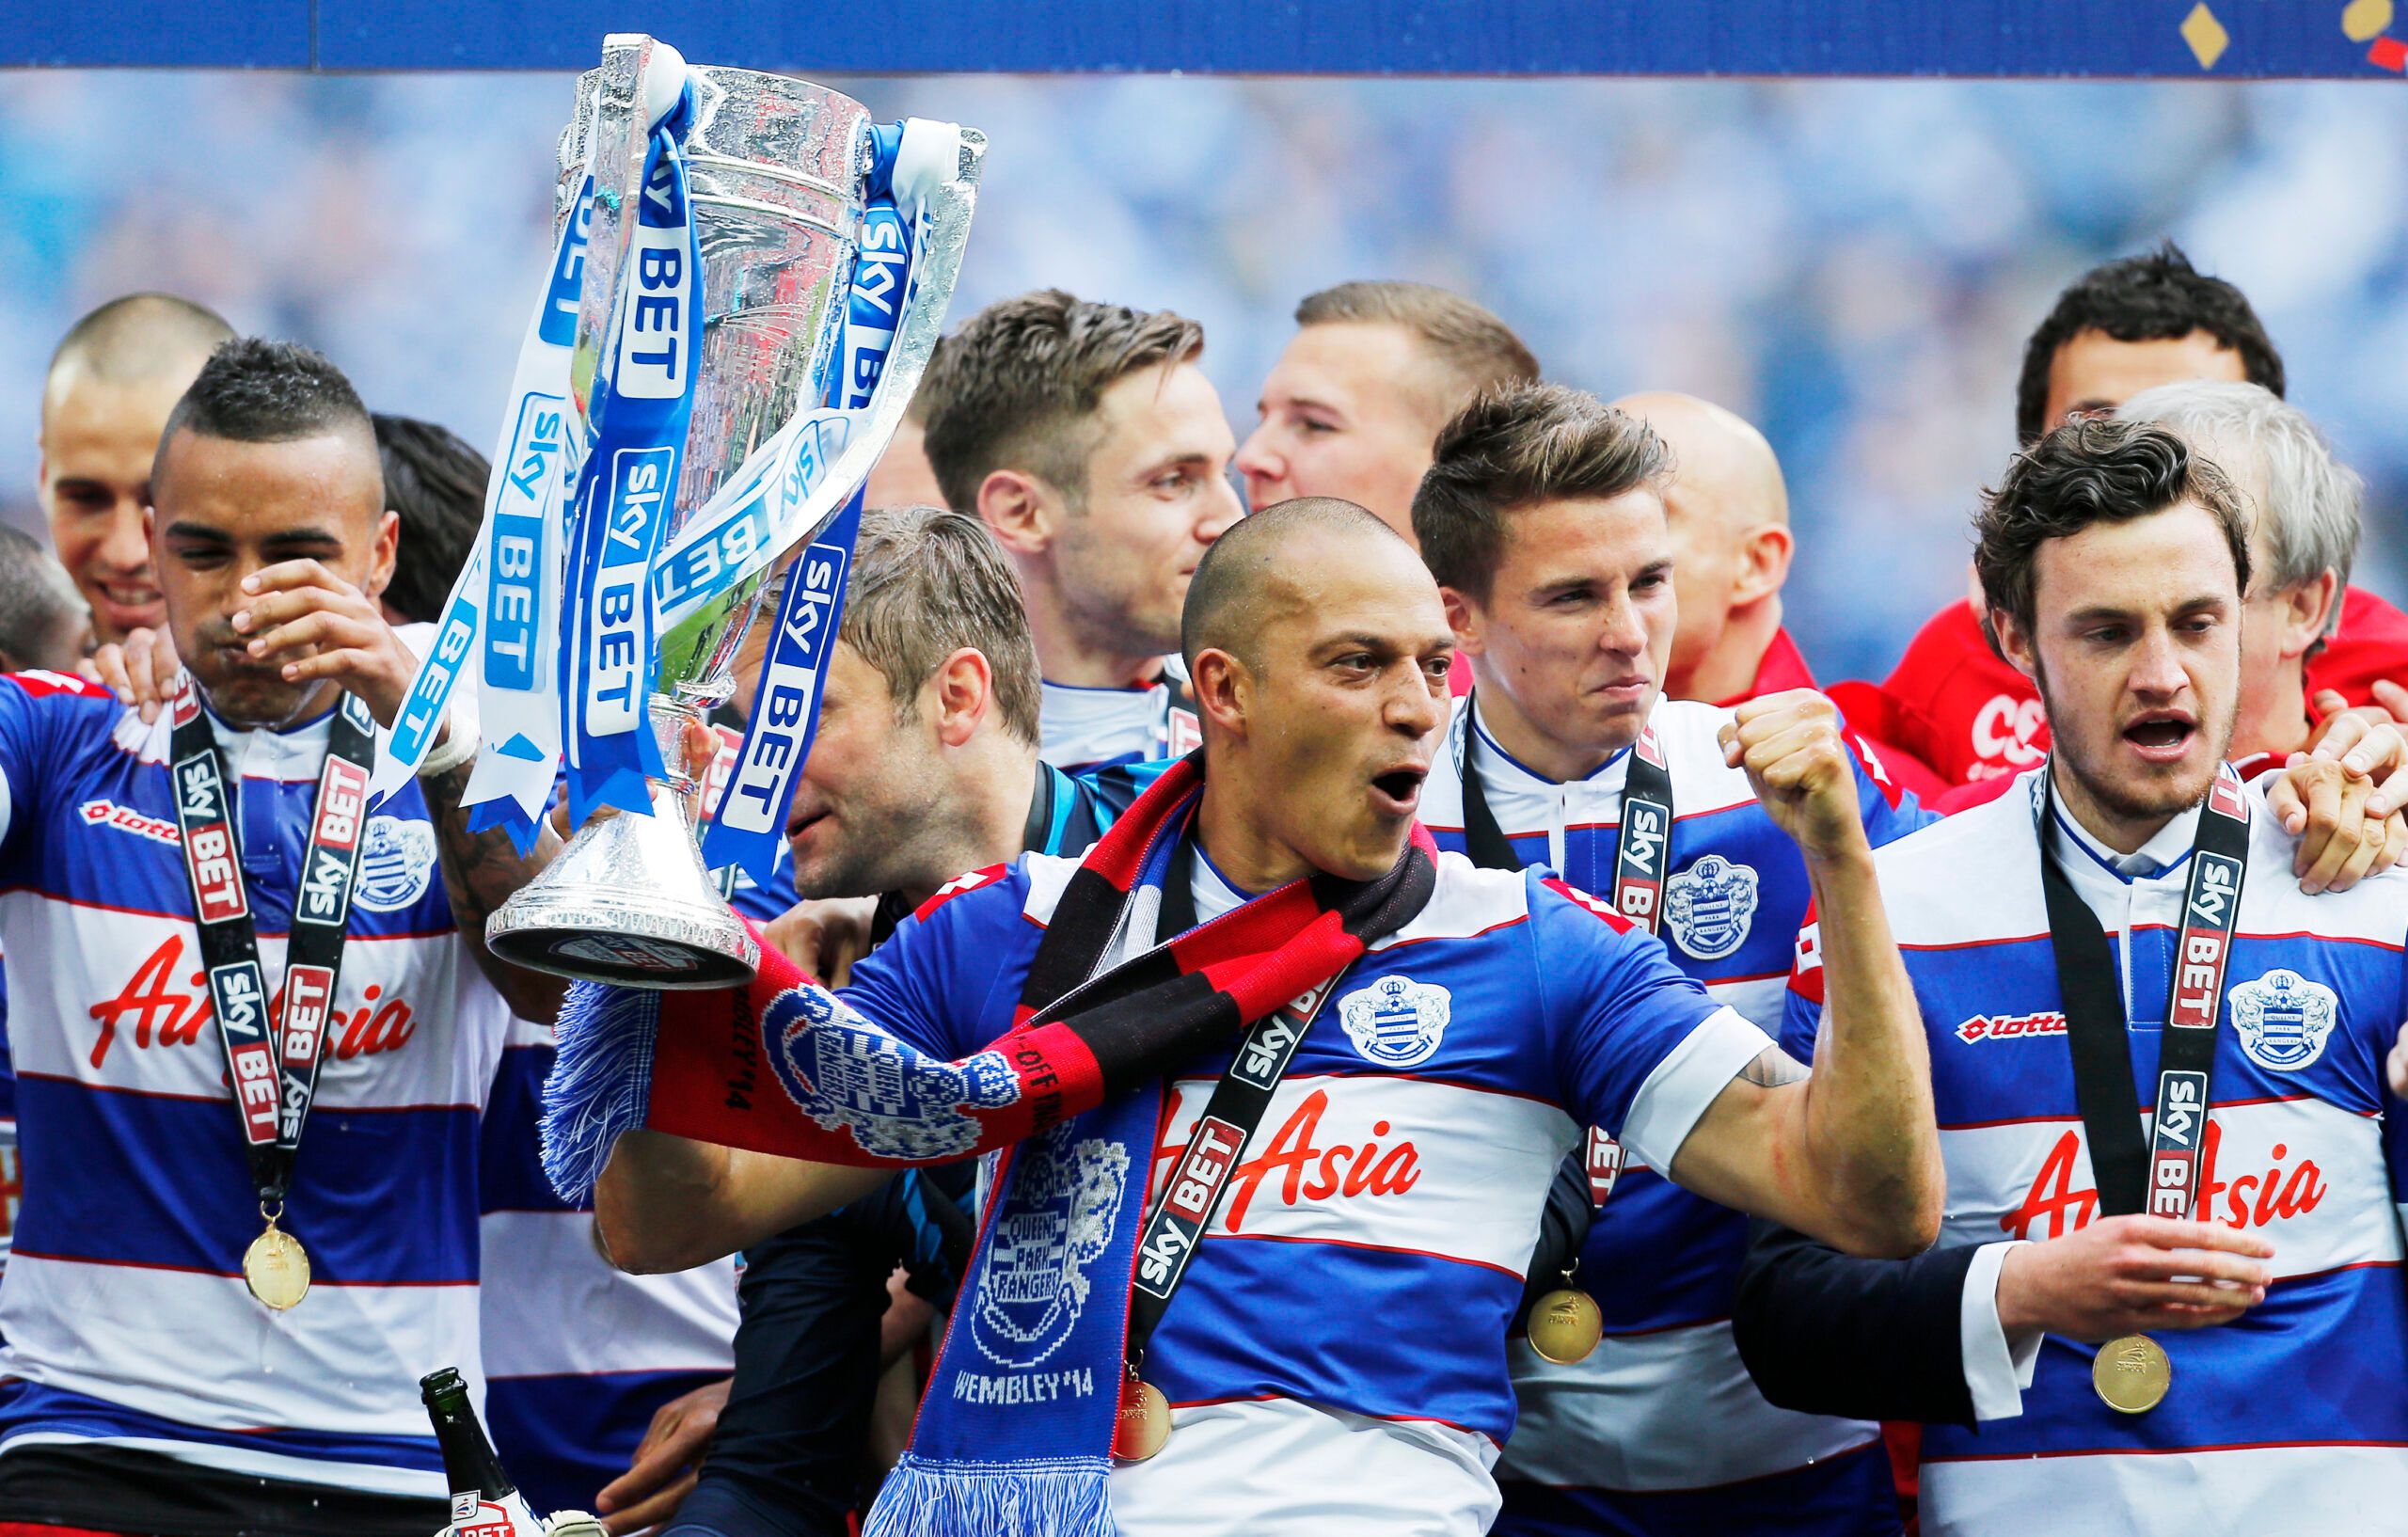 Football - Derby County v Queens Park Rangers - Sky Bet Football League Championship Play-Off Final - Wembley Stadium - 24/5/14 
QPR's Bobby Zamora (C) celebrates with the trophy and team mates after winning the Football League Championship Play Off Final 
Mandatory Credit: Action Images / Andrew Couldridge 
Livepic 
EDITORIAL USE ONLY. No use with unauthorized audio, video, data, fixture lists, club/league logos or "live" services. Online in-match use limited to 45 images, no video emulation. N